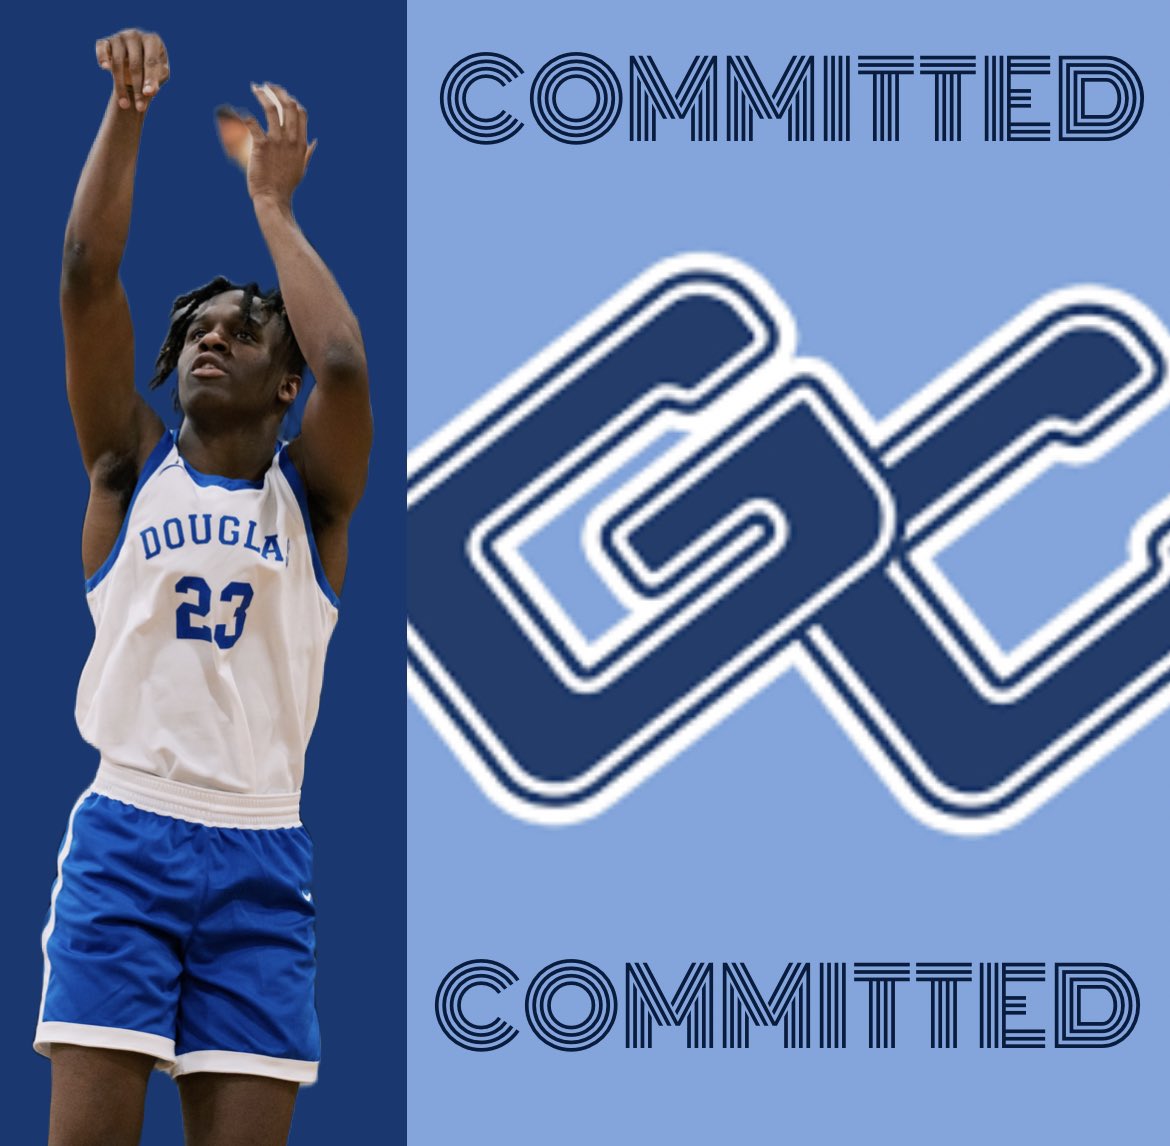 100% committed💪🏾 #Committed @GarrettCollege @CoachMattM4